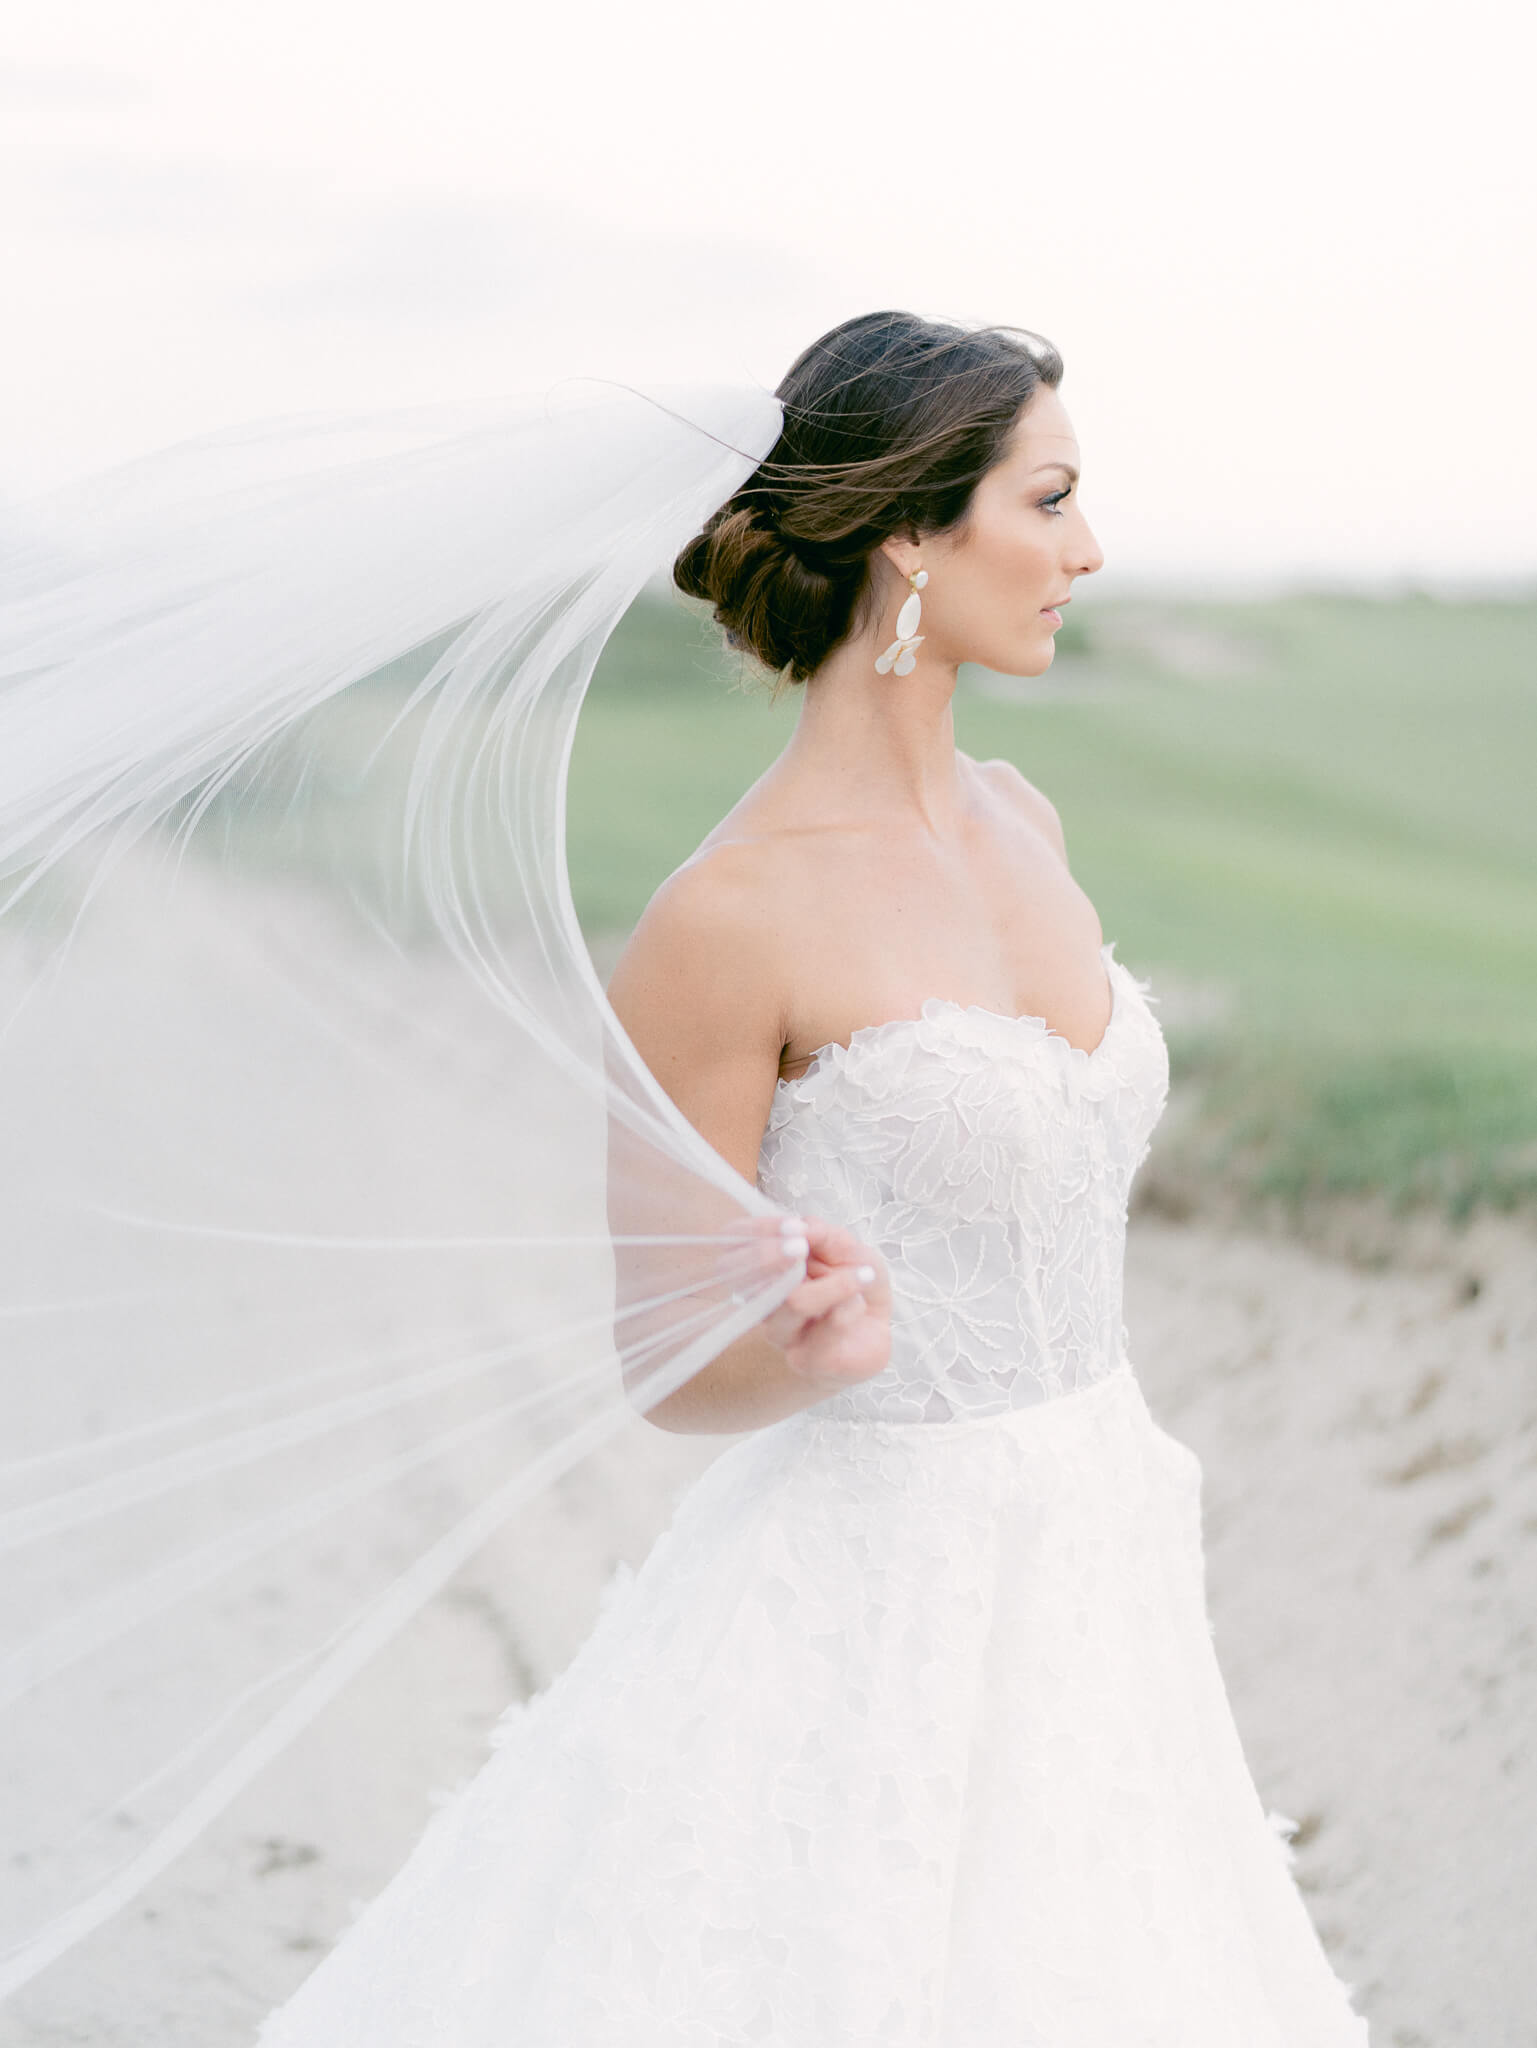 Profile of a bride holding her veil in the wind and looking off into the distant Atlantic ocean on the Kiawah Island Golf Course.